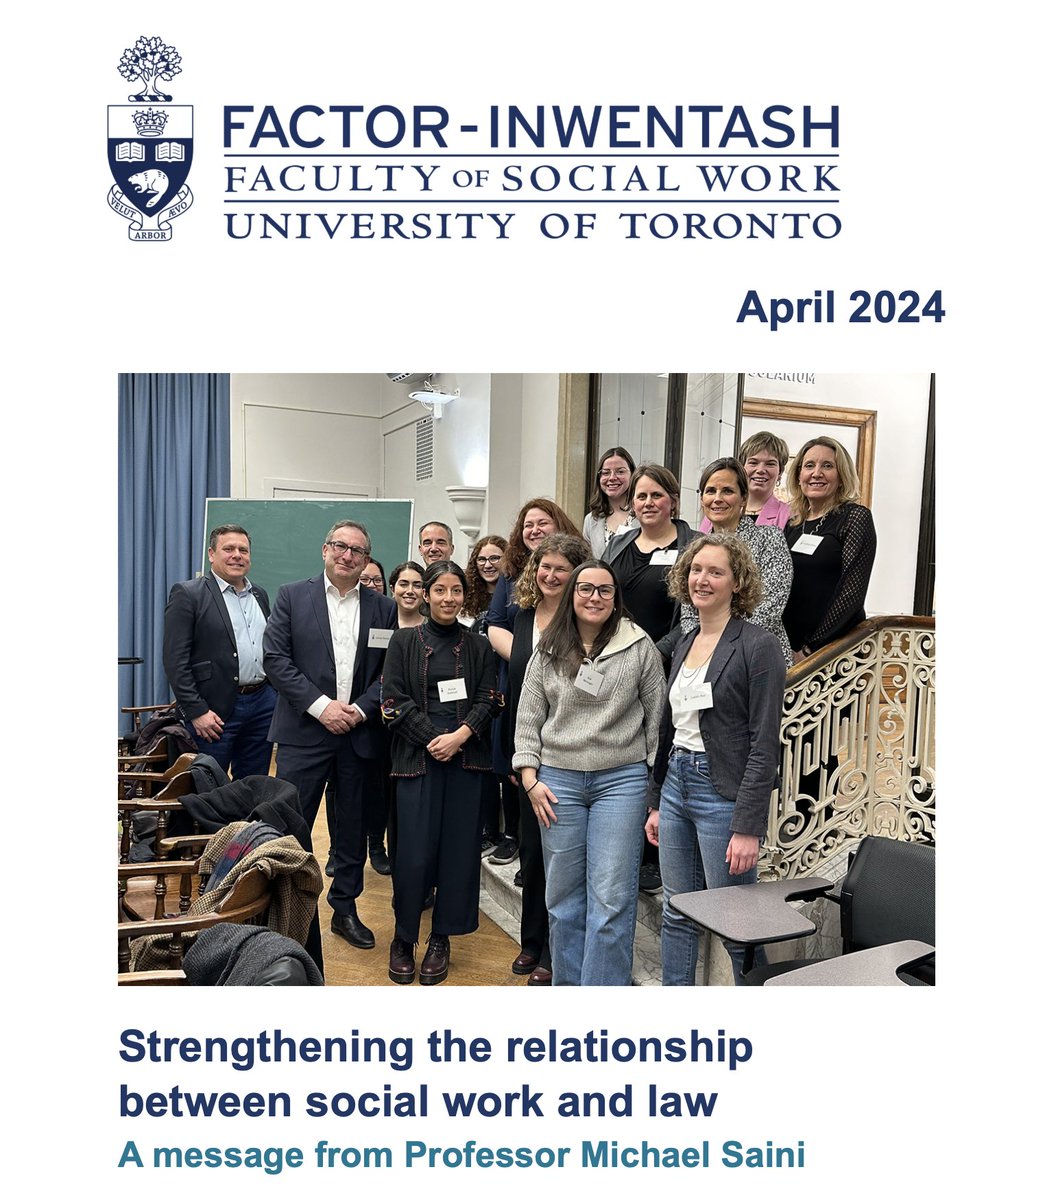 ICYMI: FIFSW's March newsletter features a message from Prof. Michael Saini on the relationship between @UofTLaw & social work, a new research lab dedicated to children & youth exposed to trauma, & our upcoming public lecture with Dr. Wanda Thomas Bernard: mailchi.mp/utoronto/fifsw…